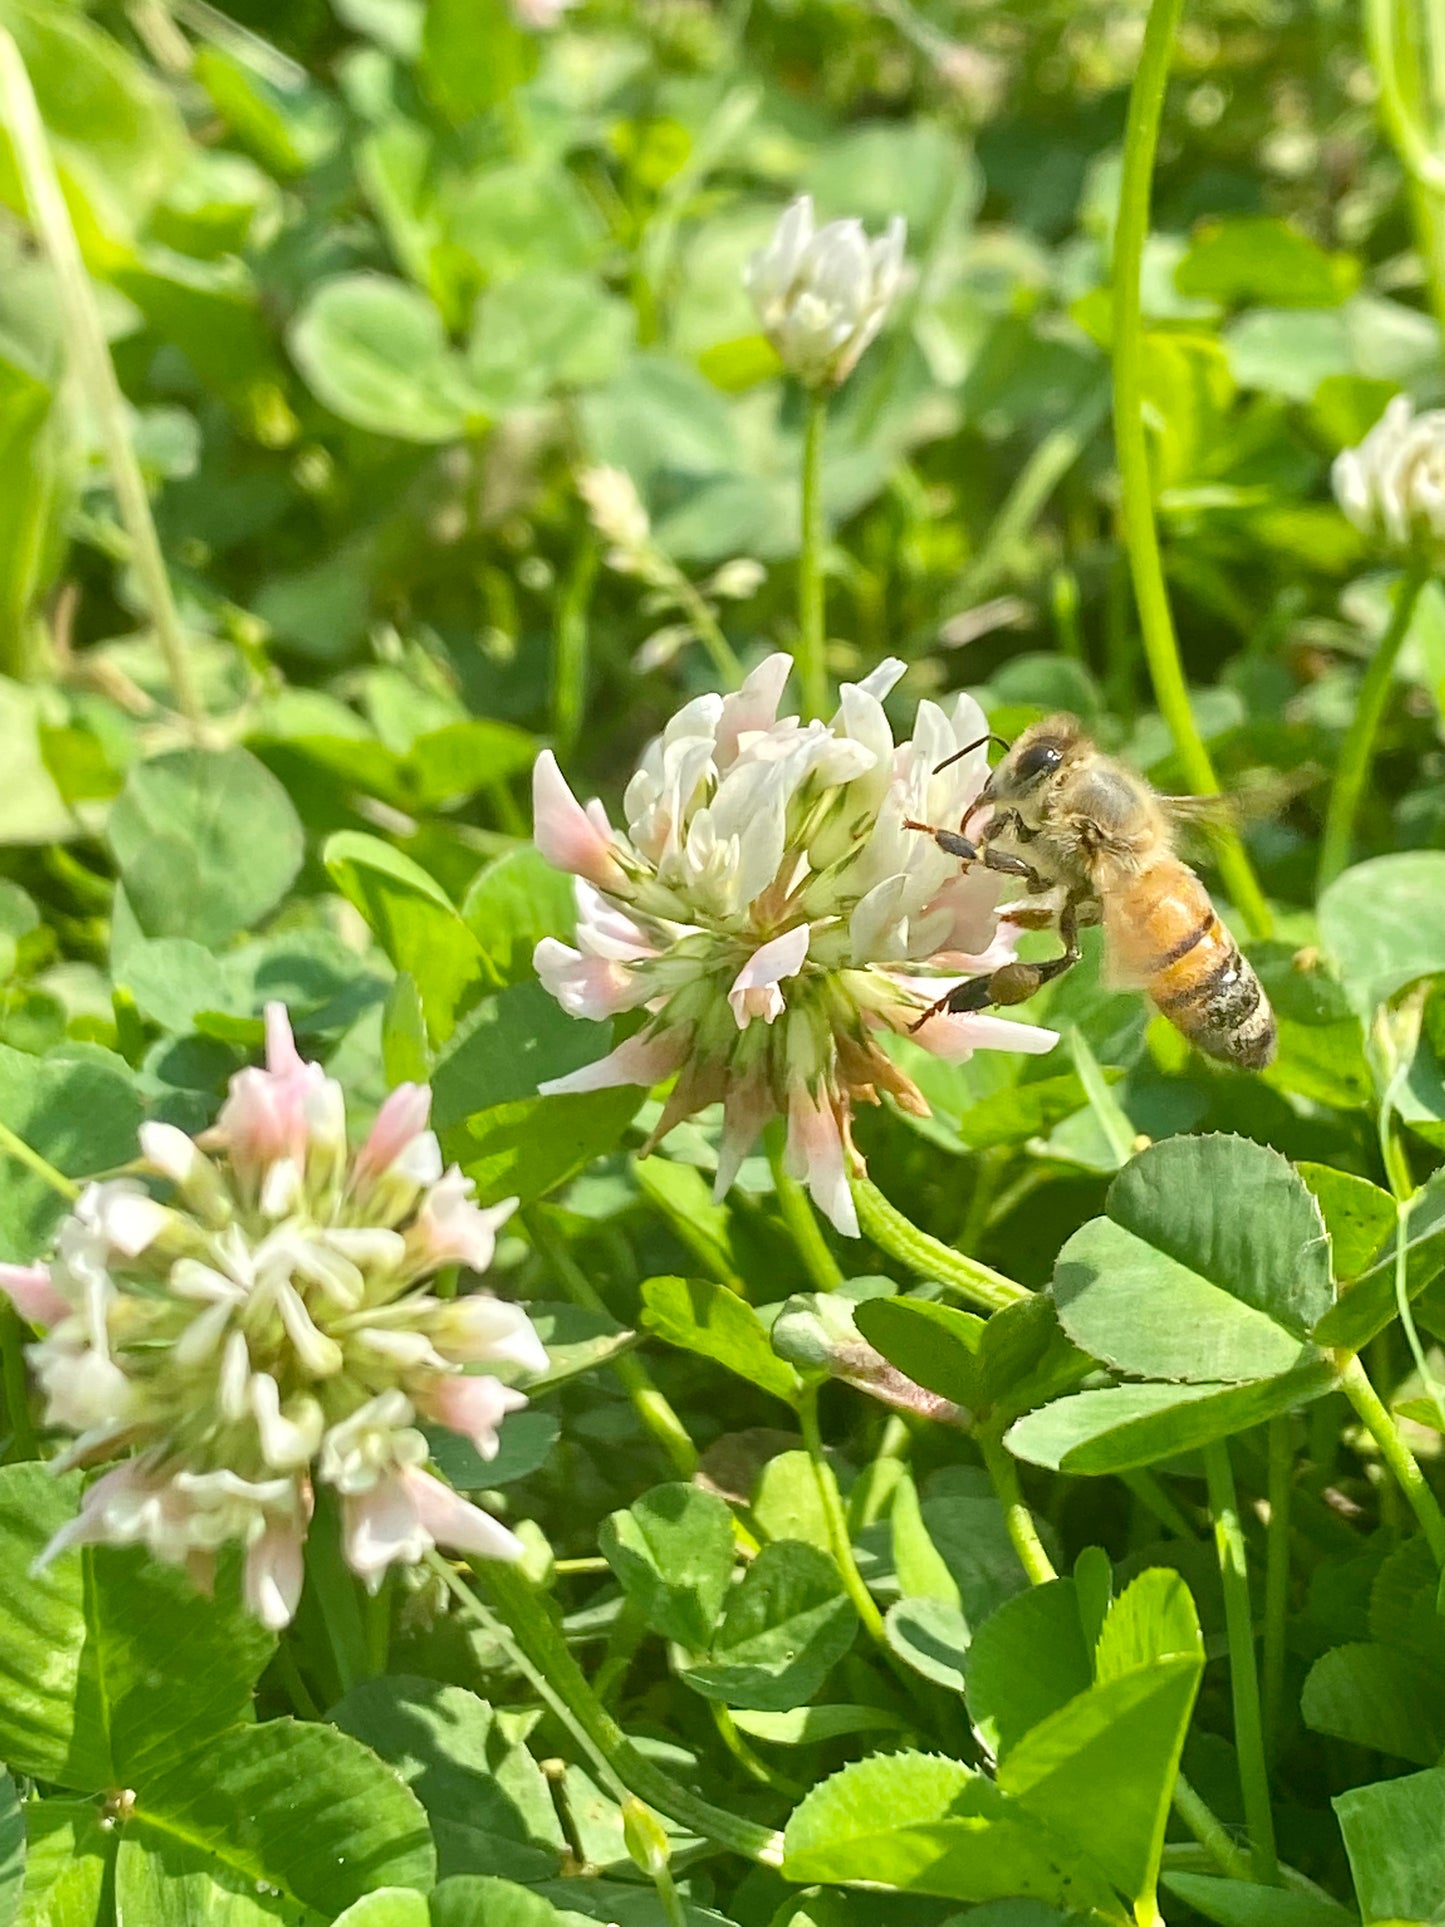 Wild clover flowers 100% natural treat - Product of Quebec 